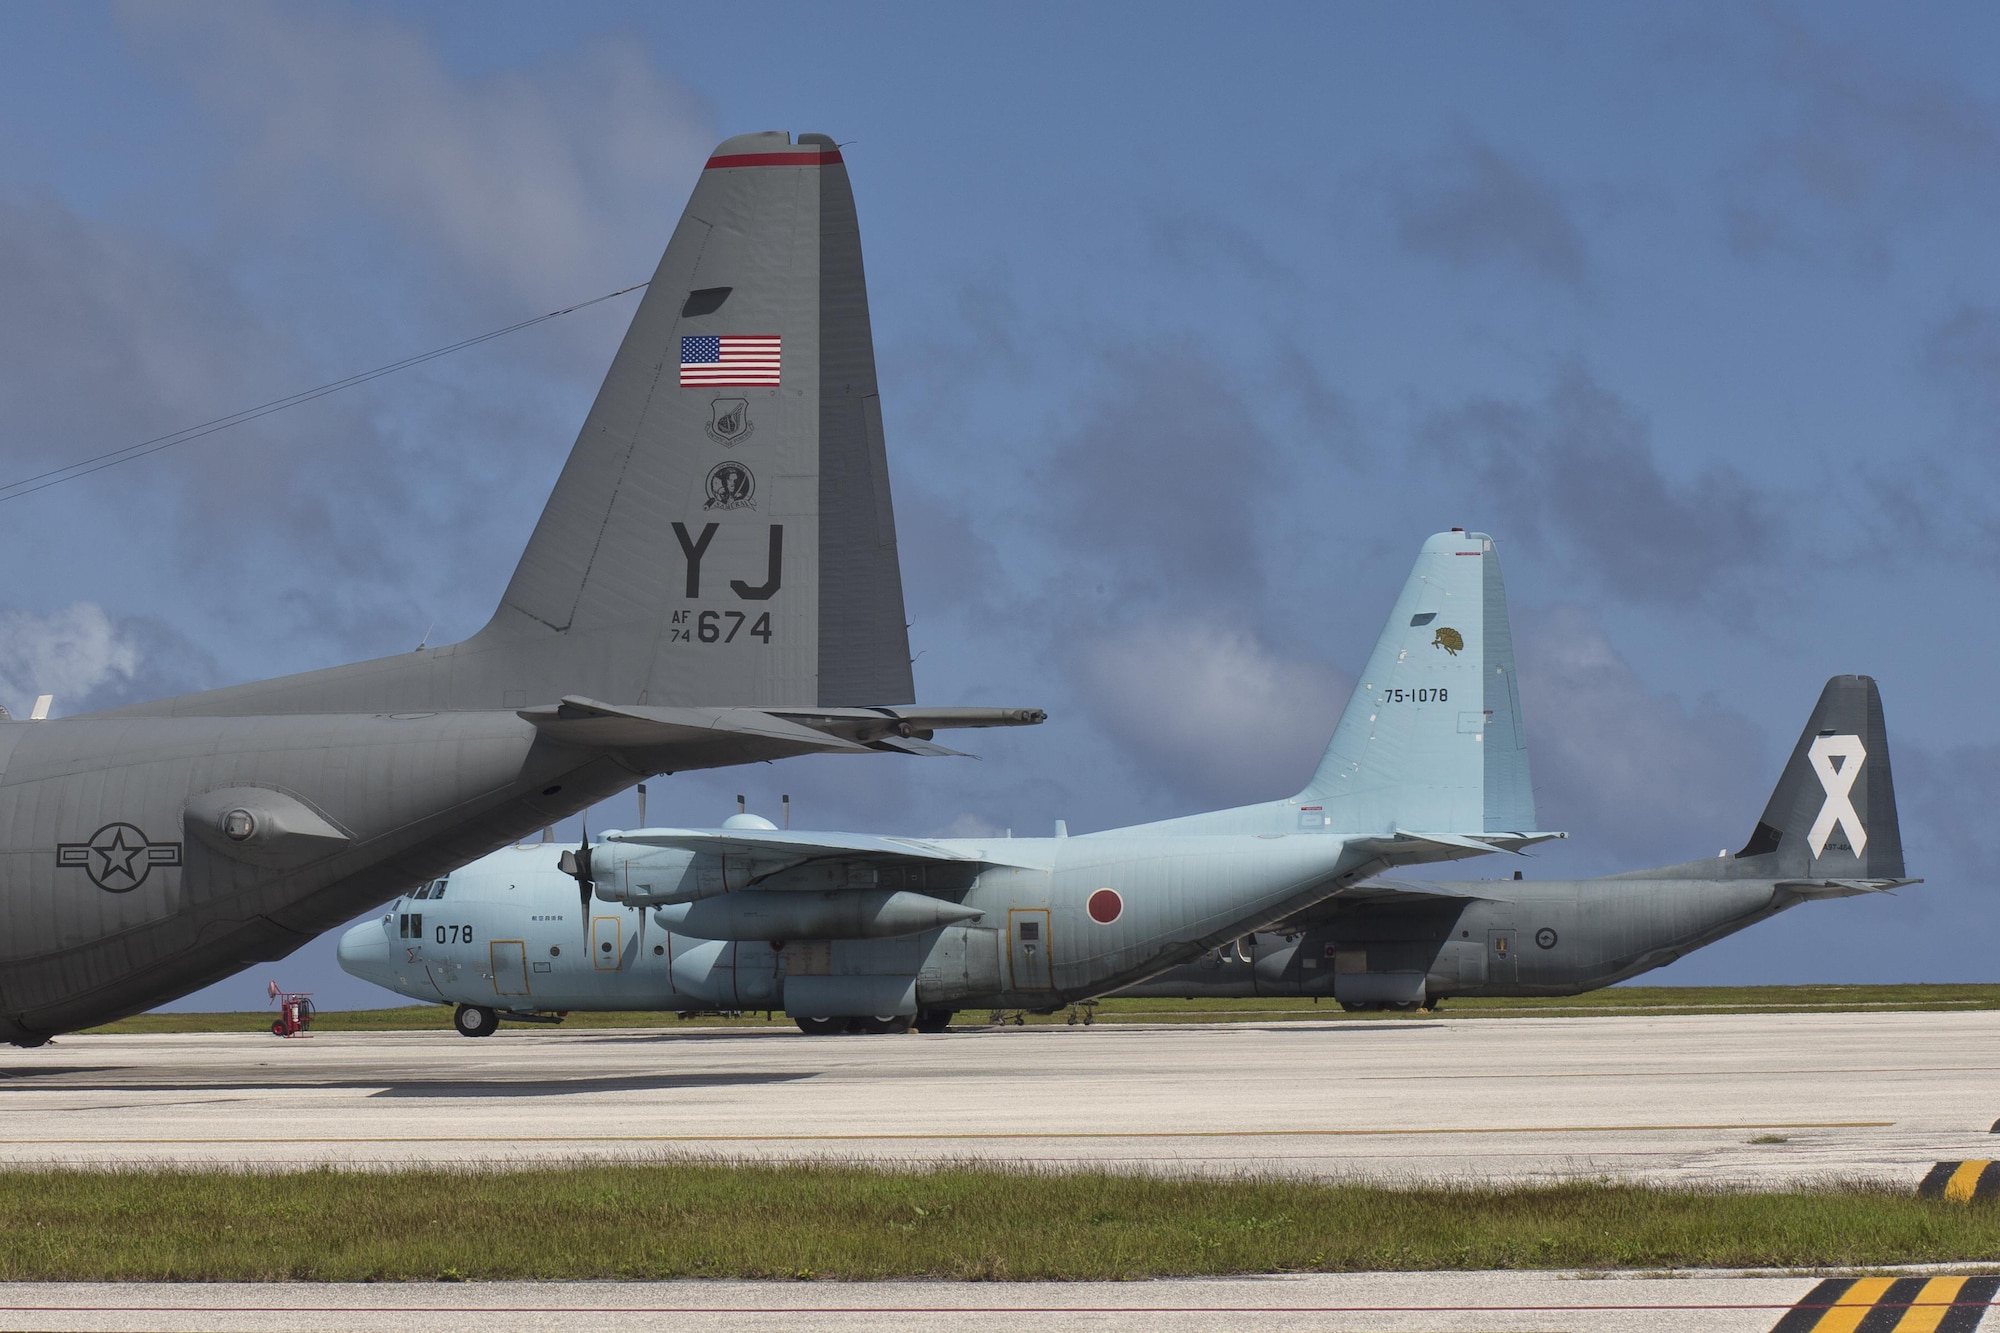 C-130s from the U.S. Air Force, Japan Air Self-Defense Force and Royal Australian Air Force park on the ramp at Andersen Air Force Base, Dec. 6, 2015 in preparation for Operation Christmas Drop. This year marks the 64th year of Operation Christmas Drop and the first trilateral execution of Department of Defense's longest running humanitarian airdrop mission. (U.S. Air Force photo by Osakabe Yasuo/Released)